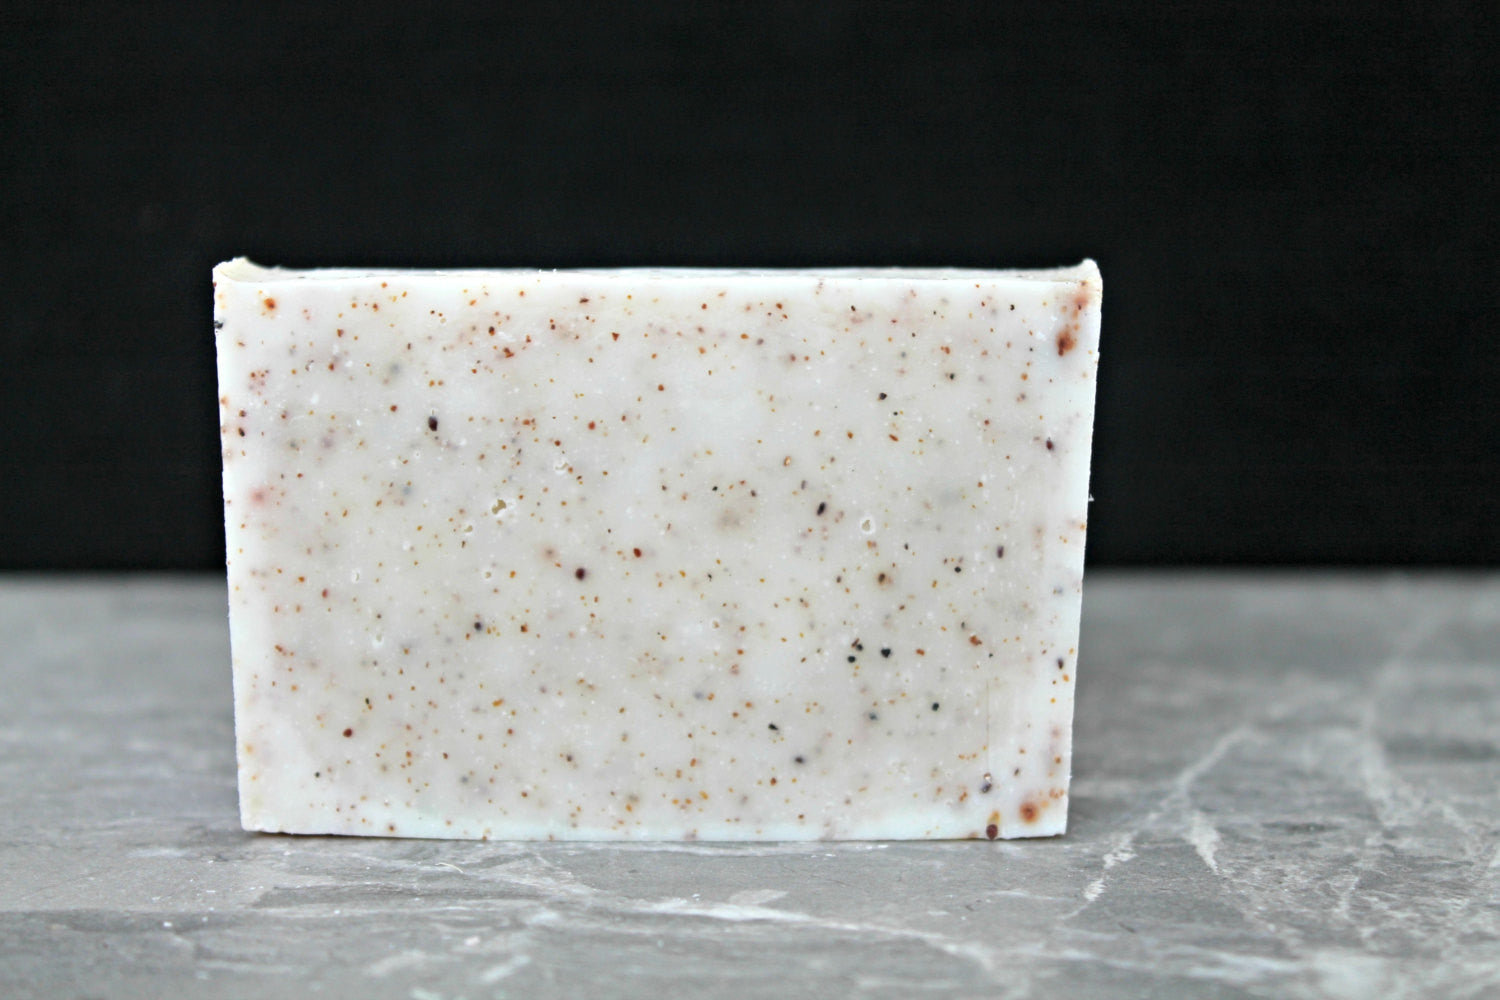 Nitty Gritty gardeners scrub soap with ground walnut, pumice and blueberry seeds. Cold process natural vegan soap.